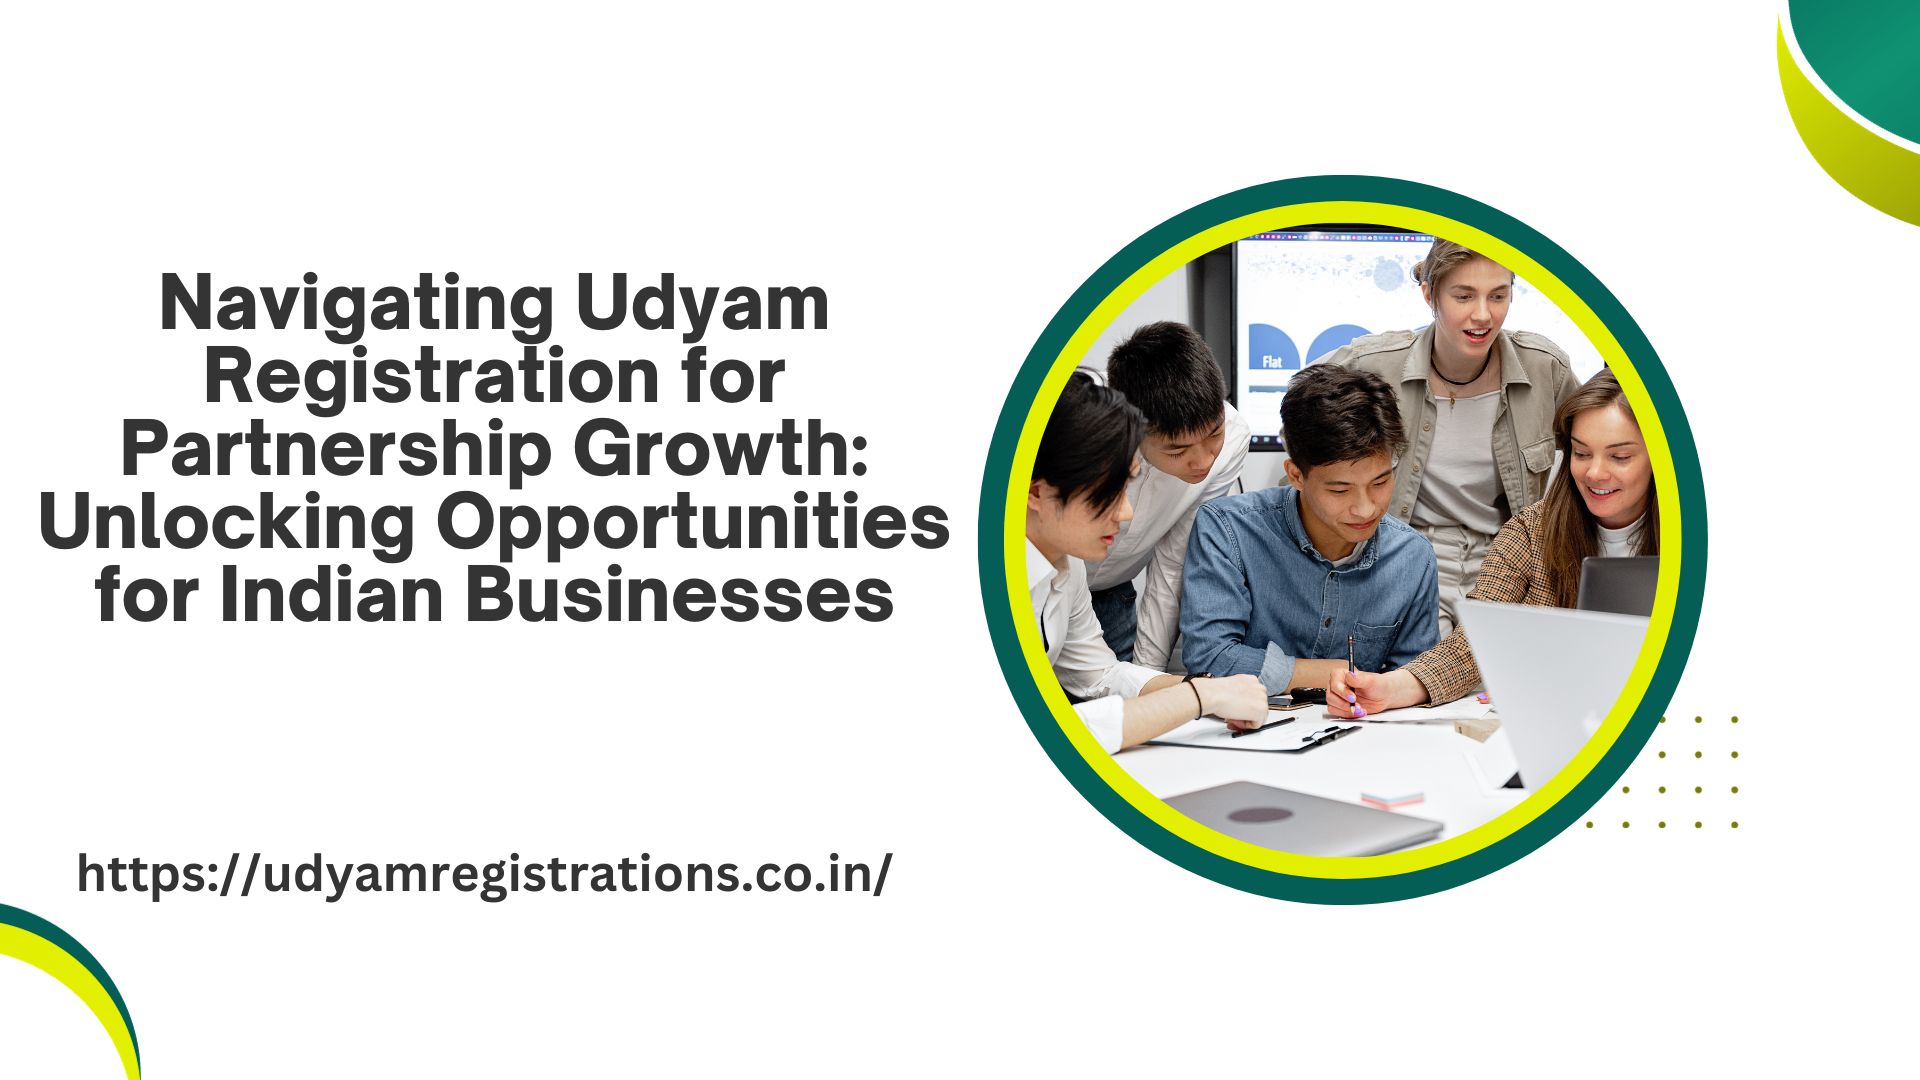 Navigating Udyam Registration for Partnership Growth: Unlocking Opportunities for Indian Businesses